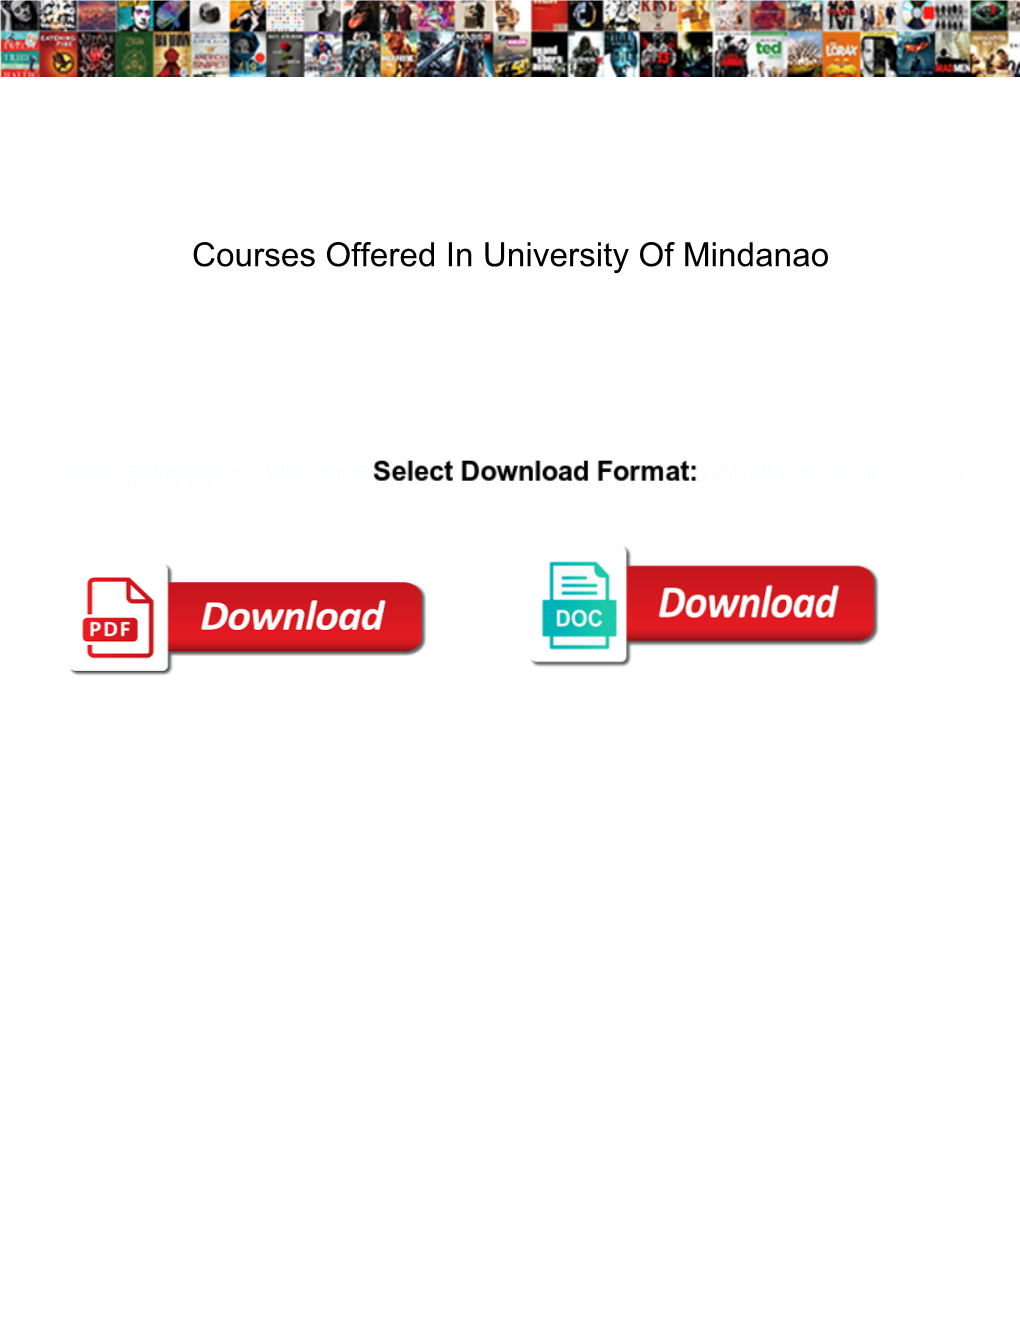 Courses Offered in University of Mindanao